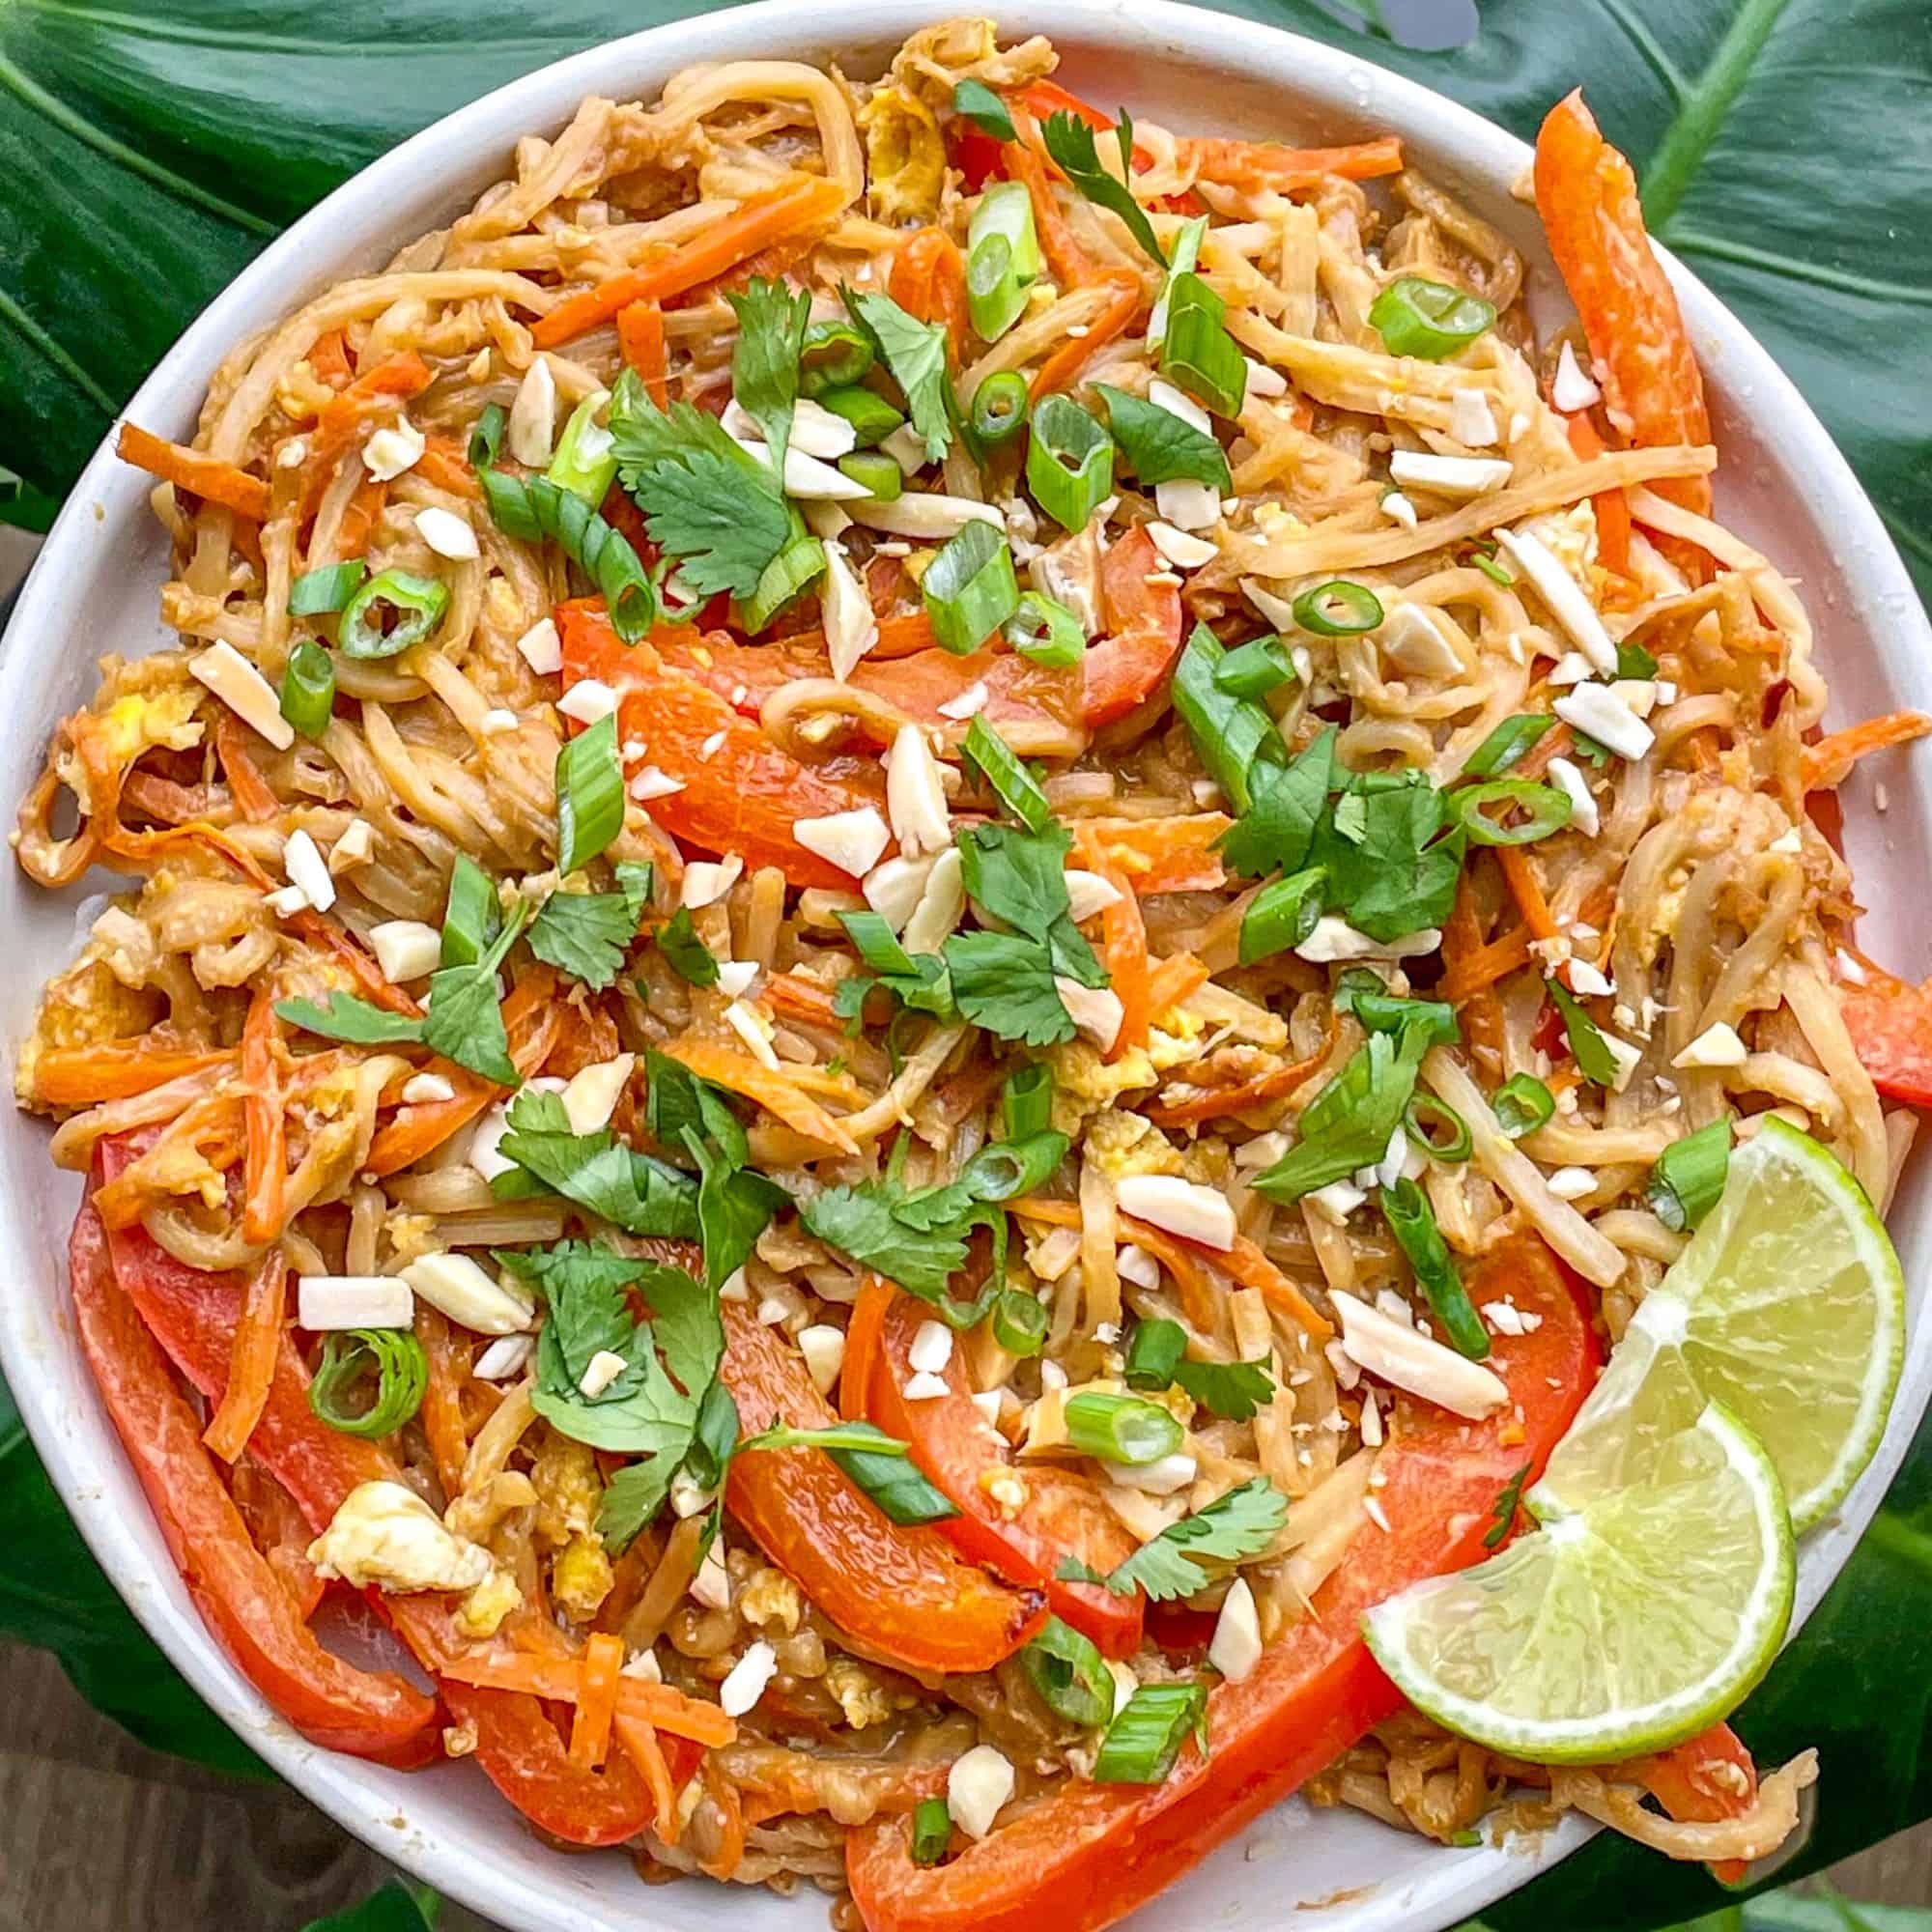 Veggie Pad Thai Made Hearts of Palm Noodles - Healthykel